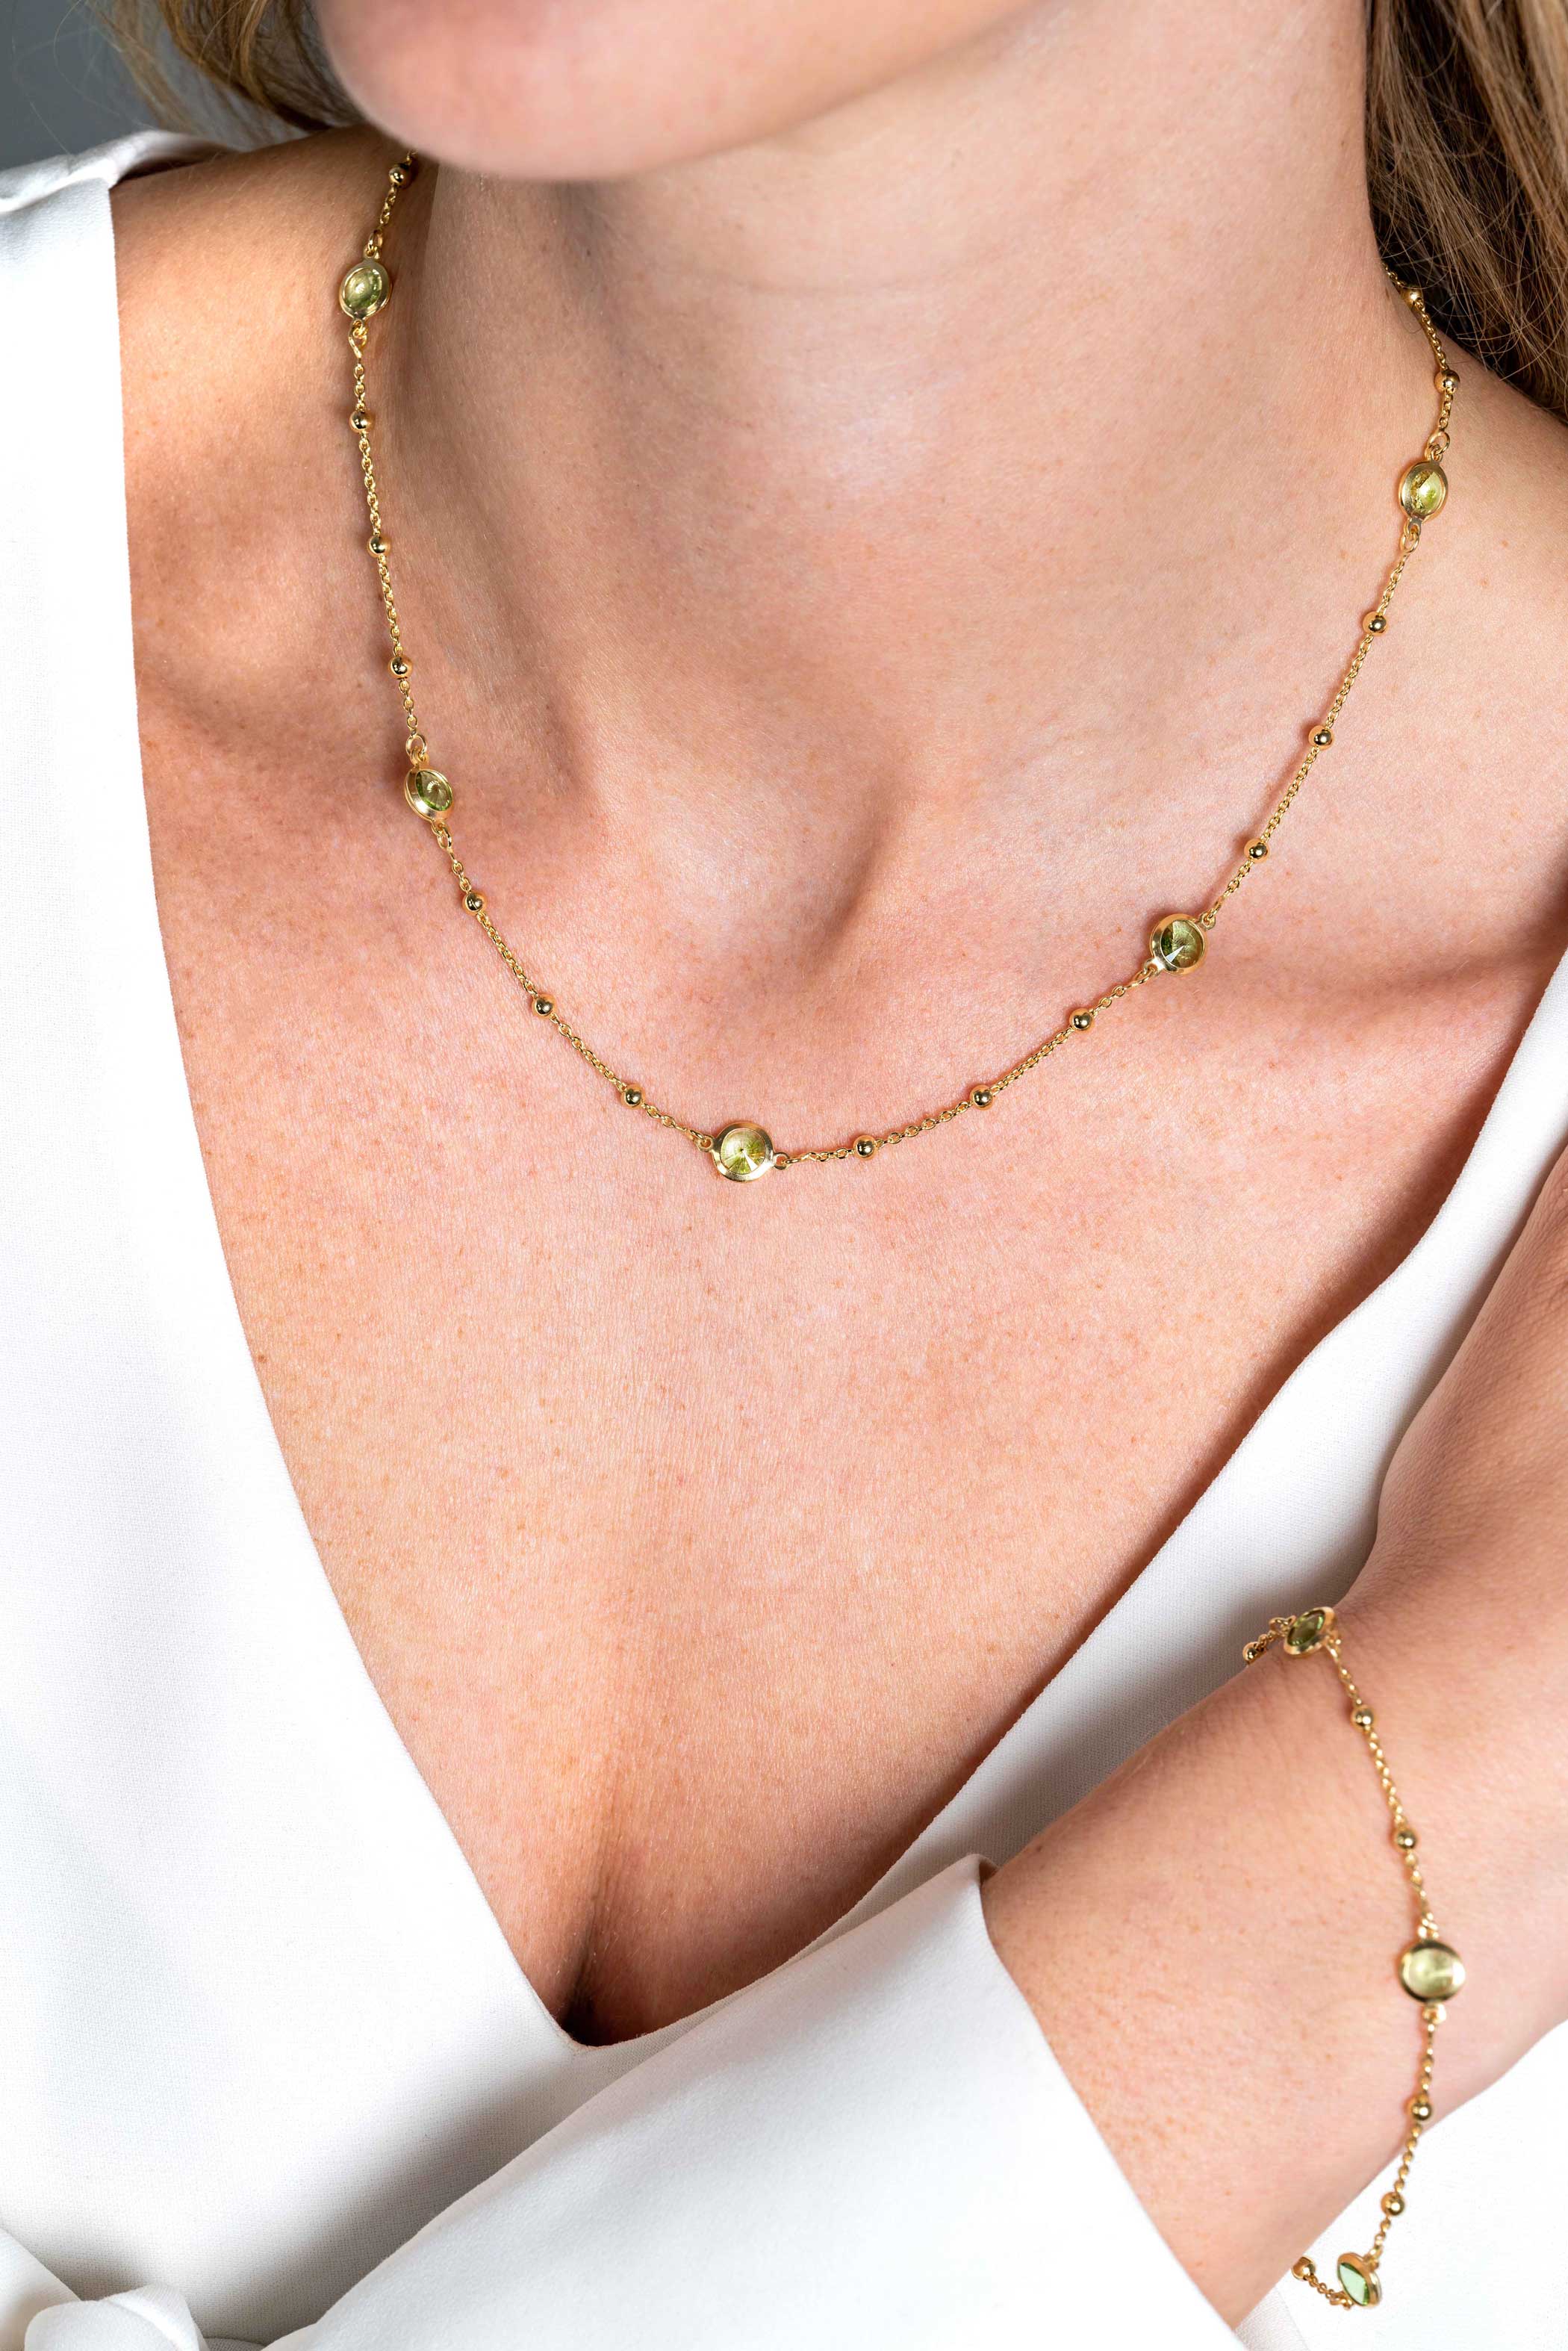 ZINZI Gold Plated Sterling Silver Necklace with Beads and Round Green Swarovski Crystals 42-45cm ZIC2348